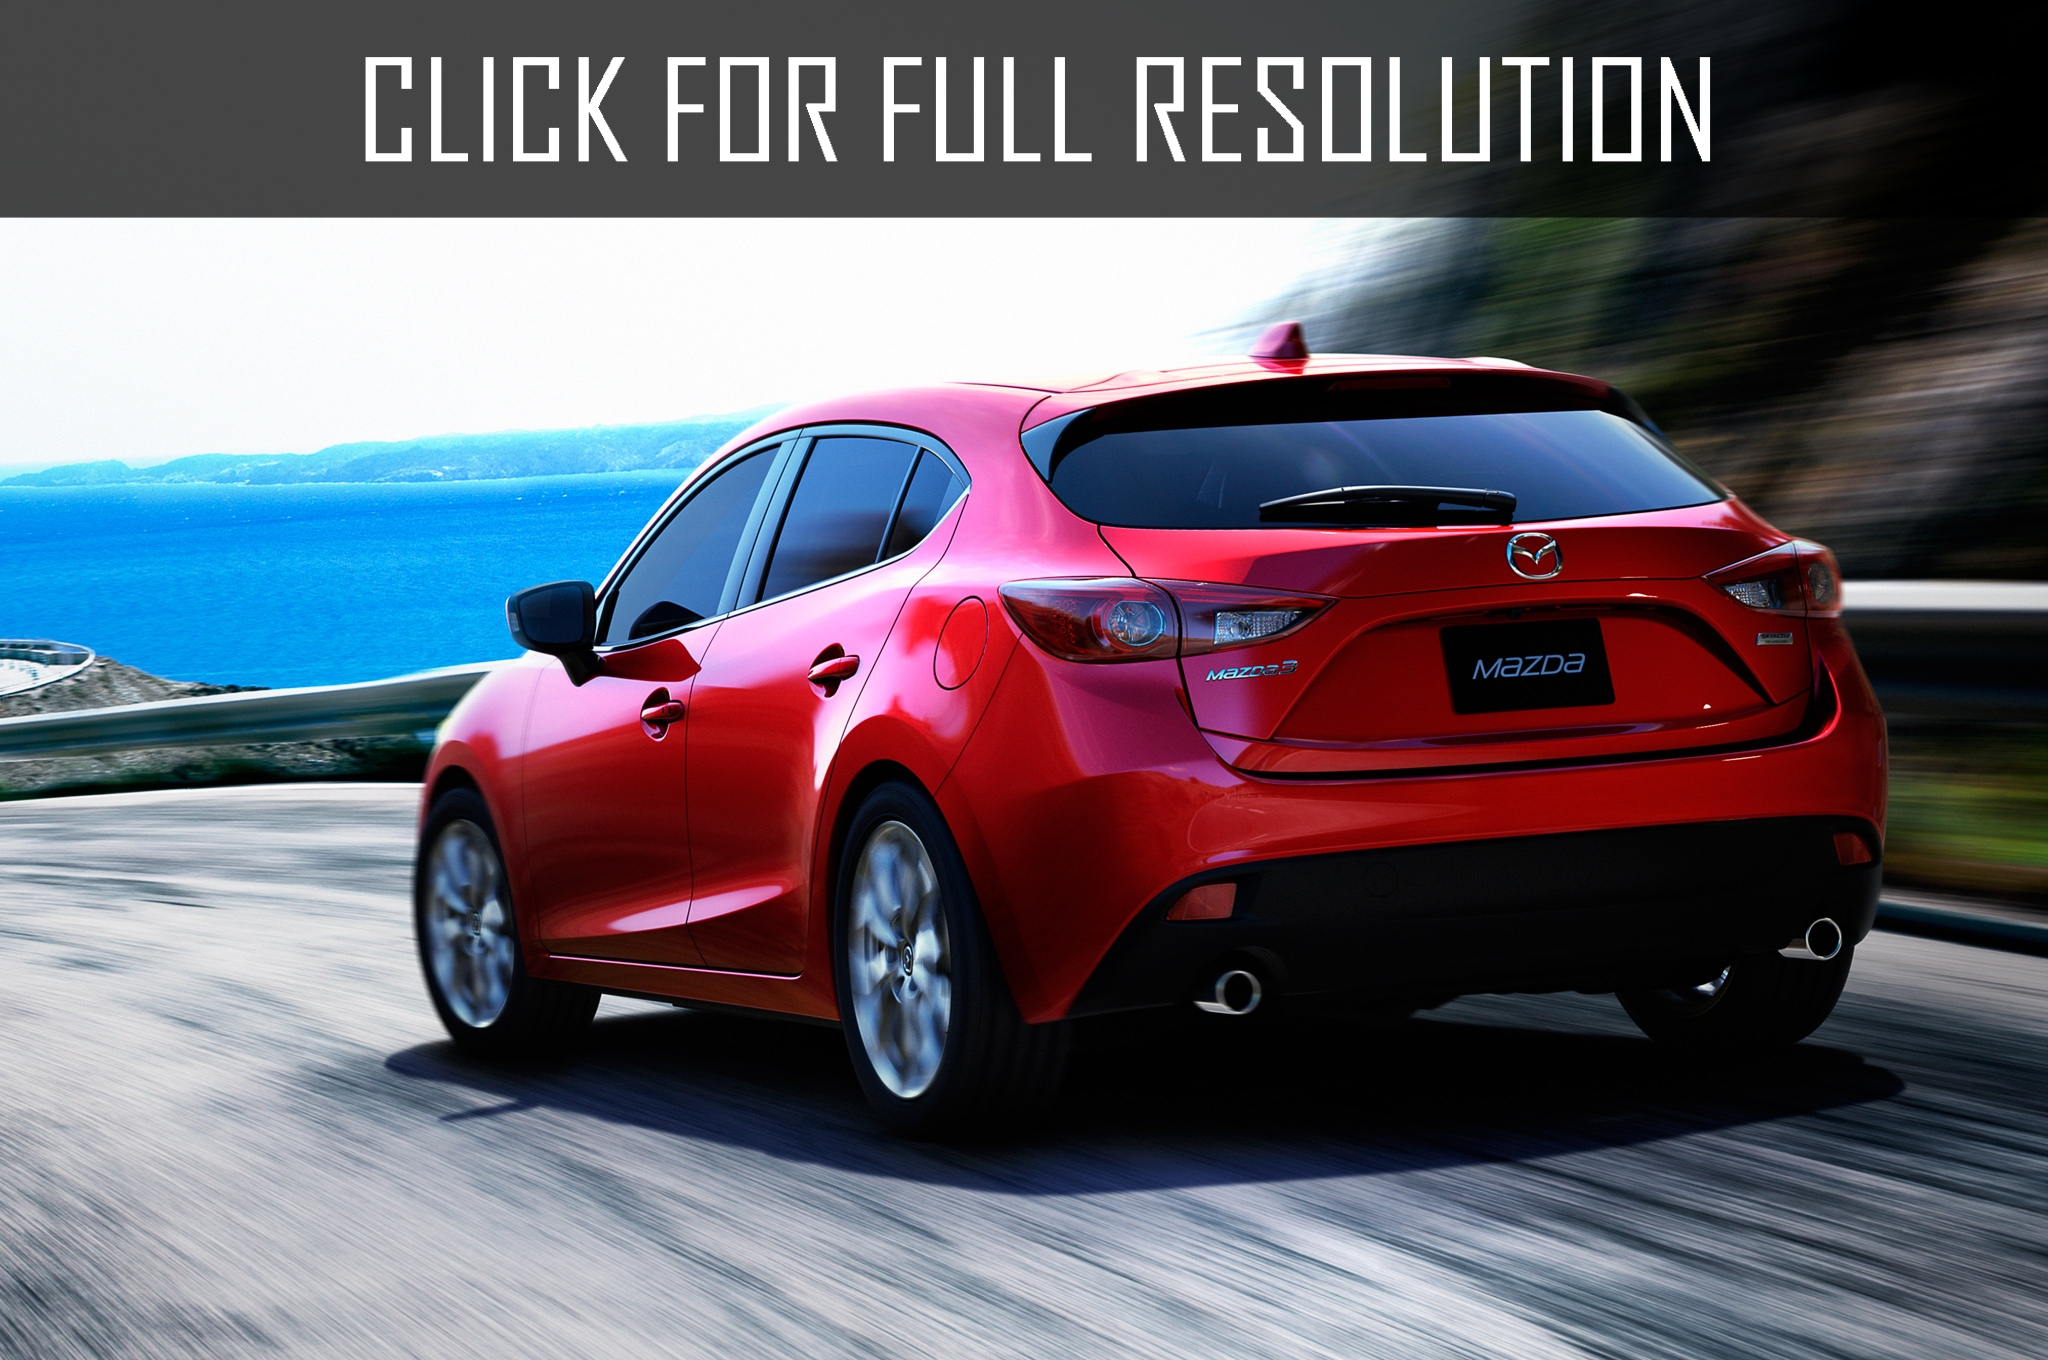 2014 Mazda 3 Hatchback news, reviews, msrp, ratings with